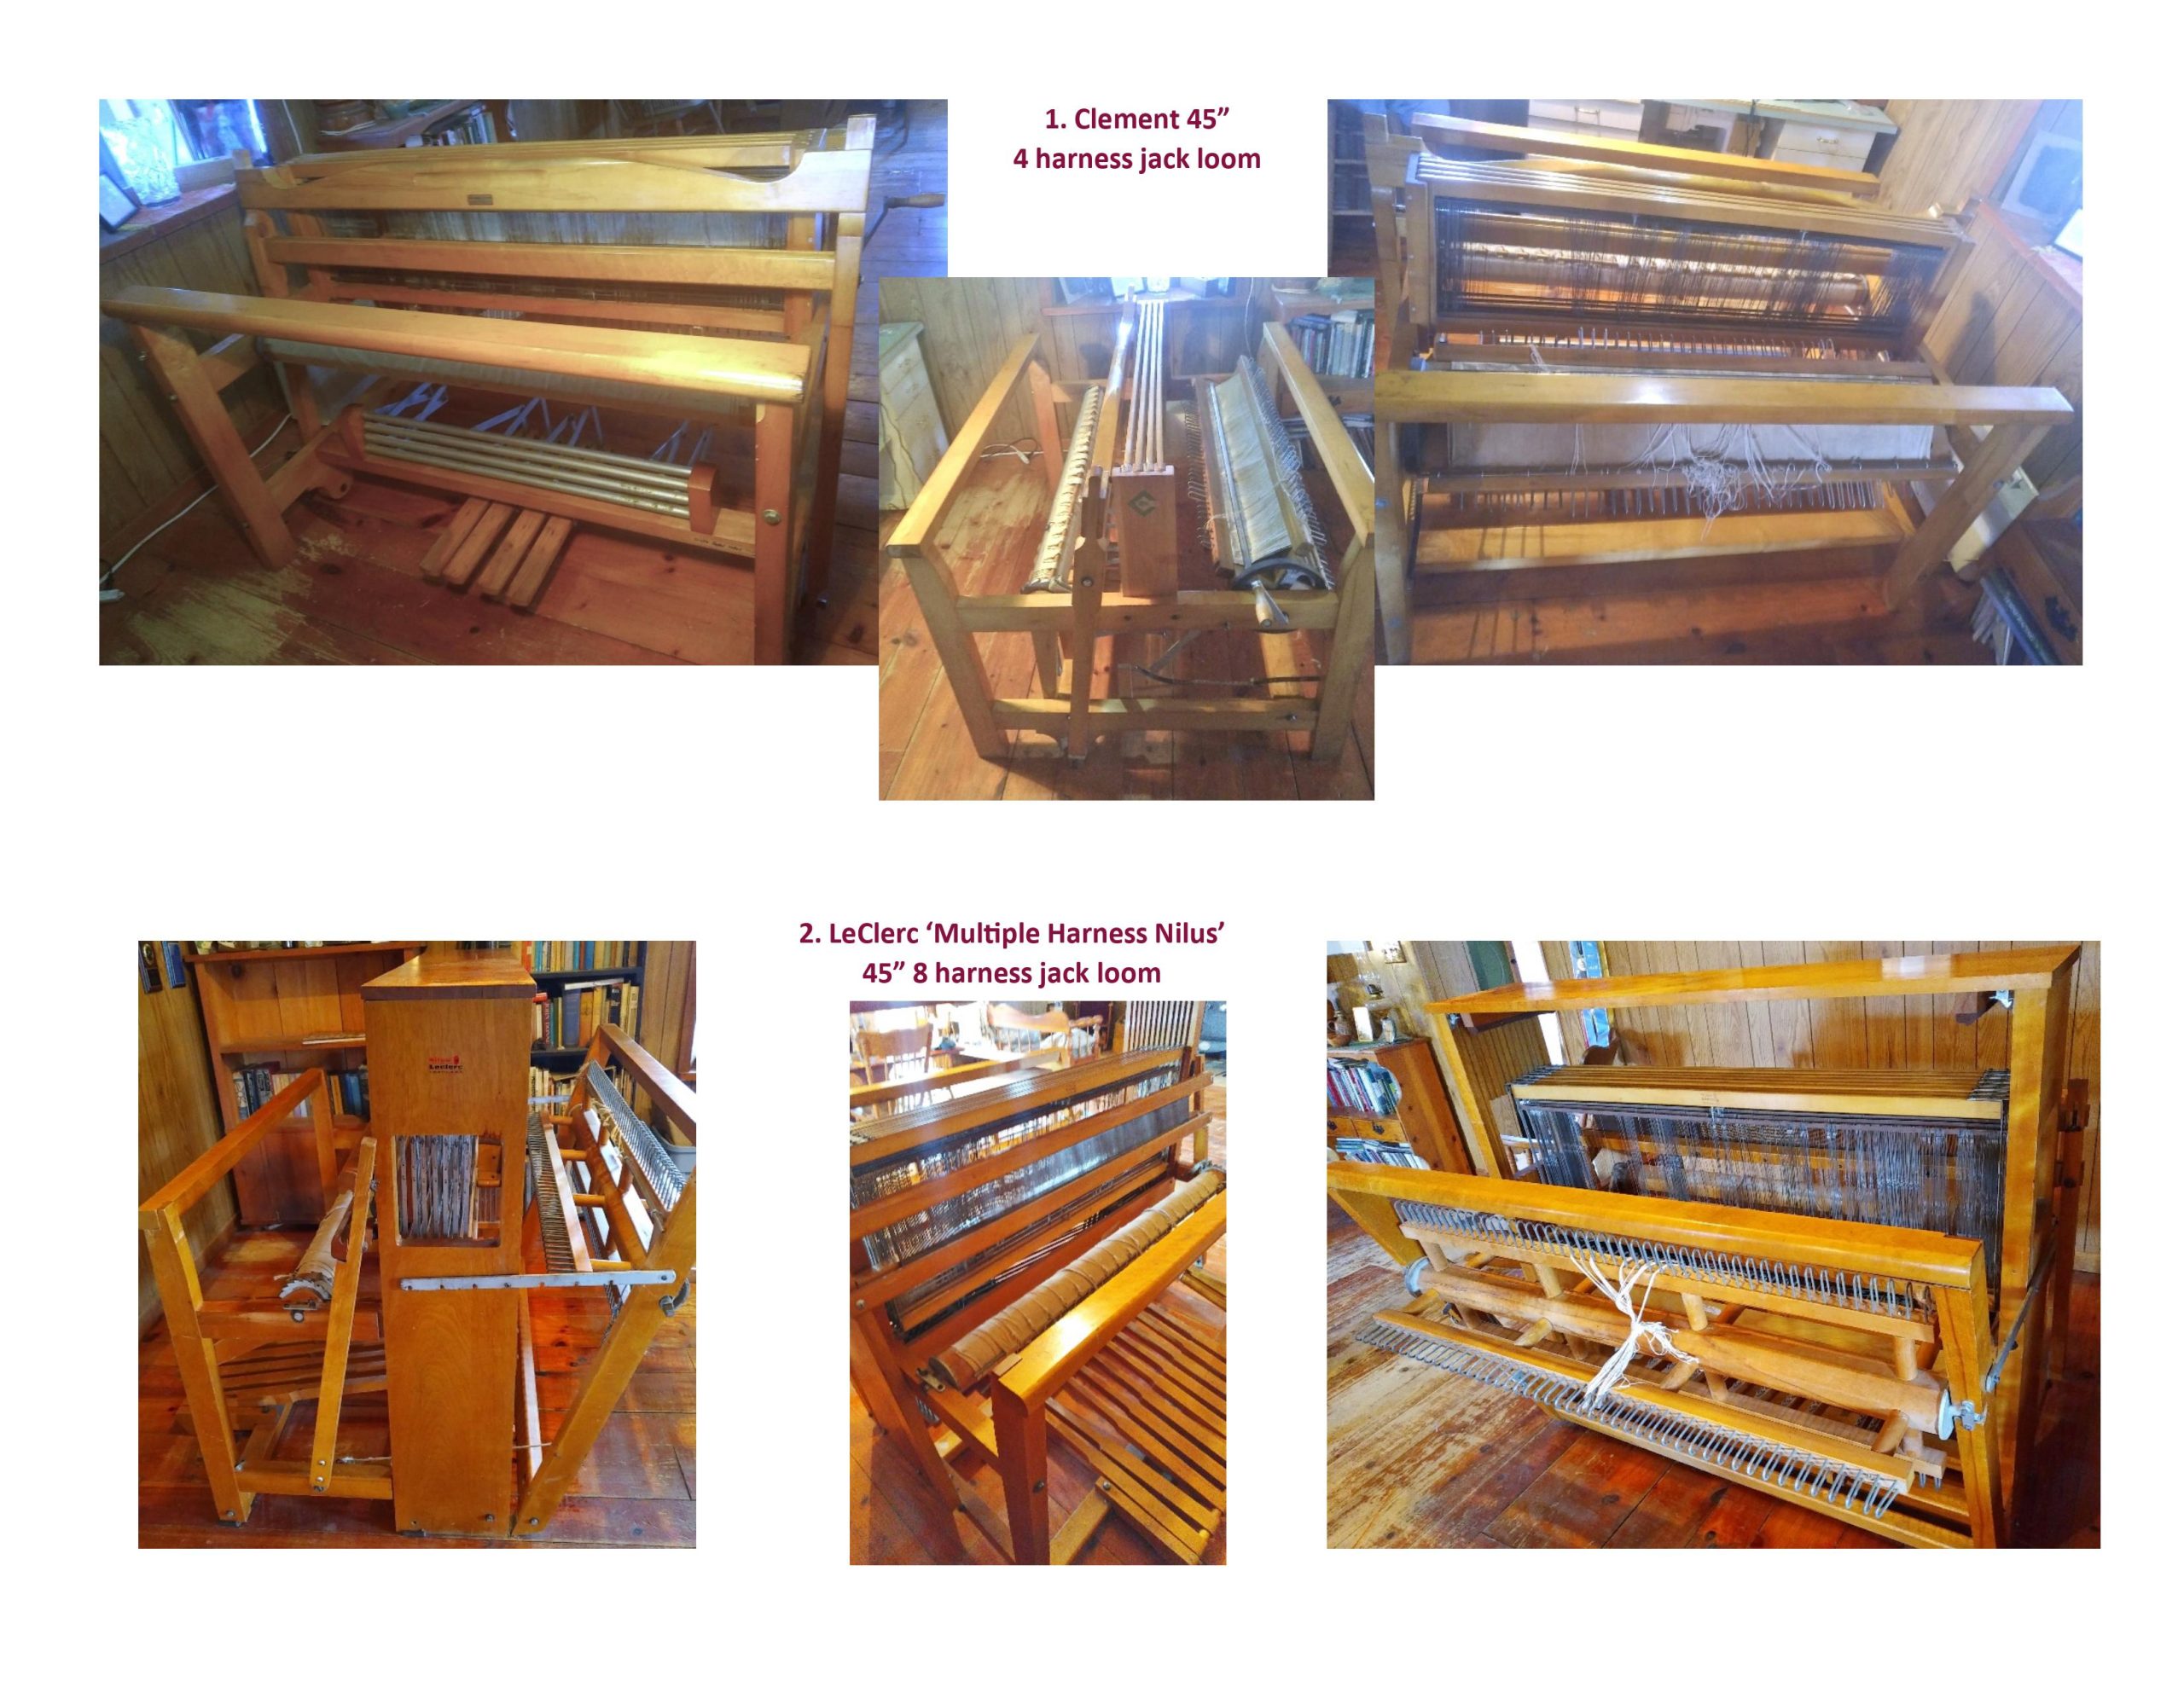 For Sale: Looms and Weaving Equipment (Elphin)